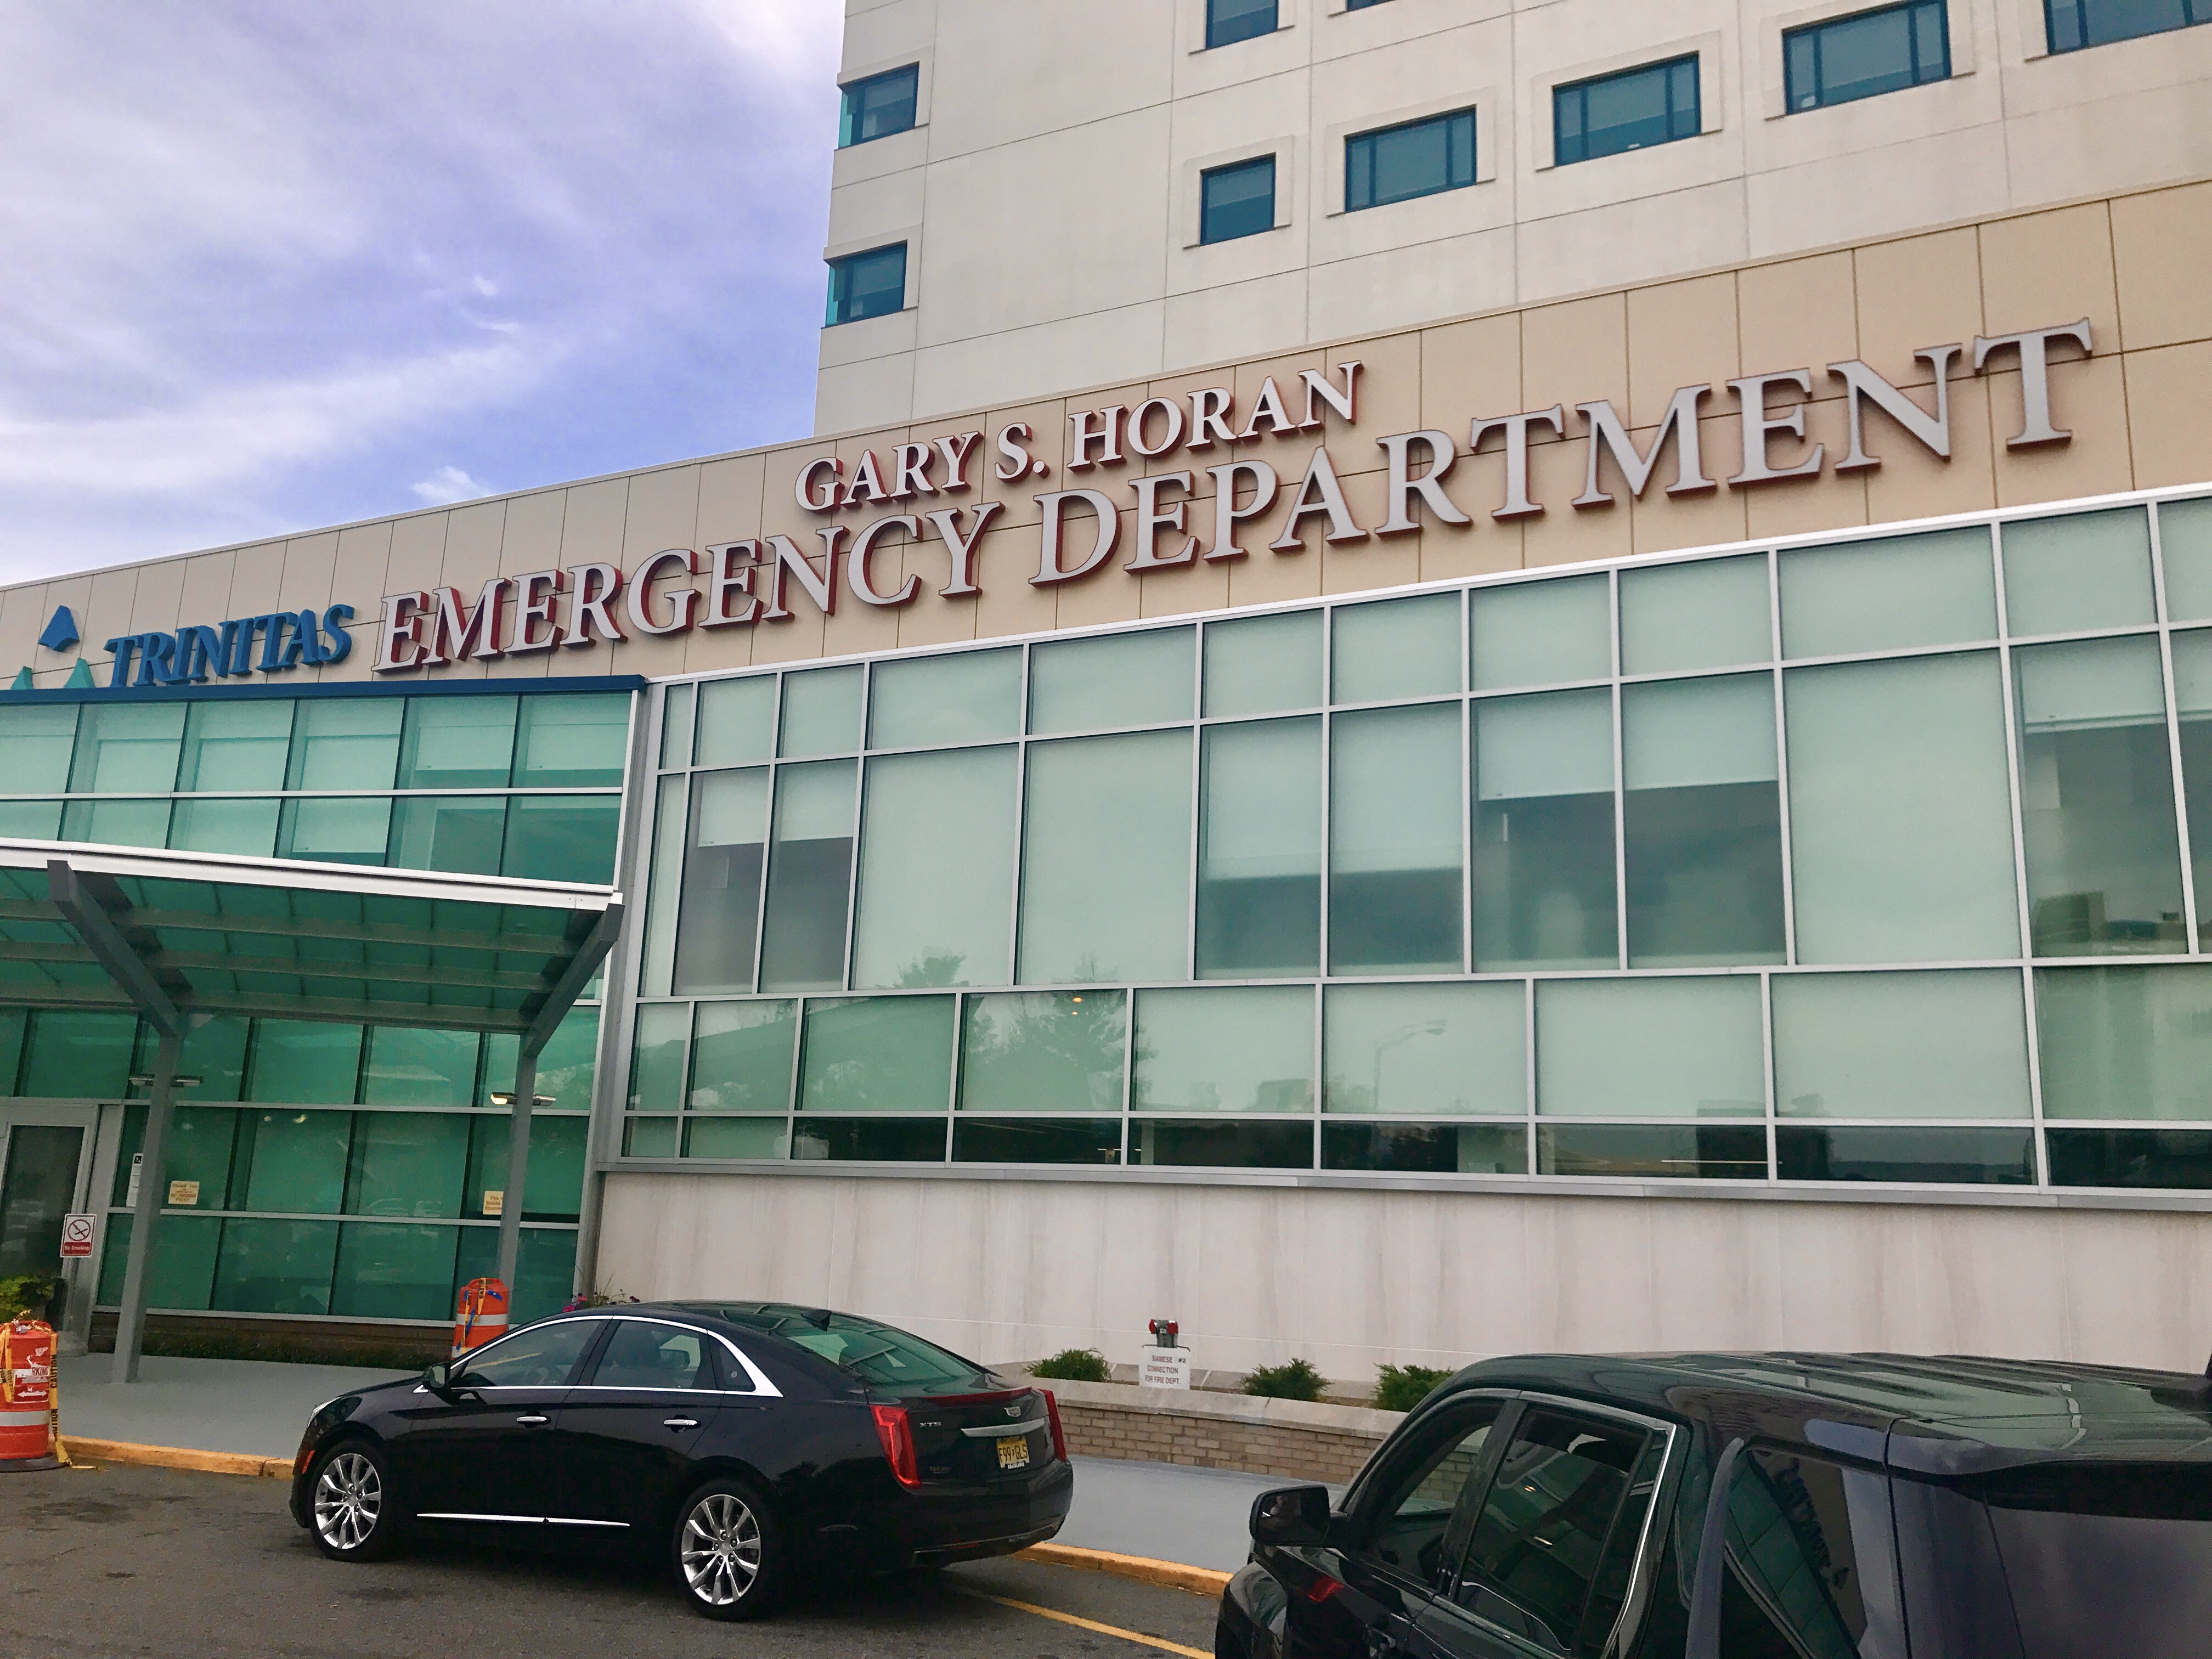 Introducing the Gary S. Horan Emergency Department